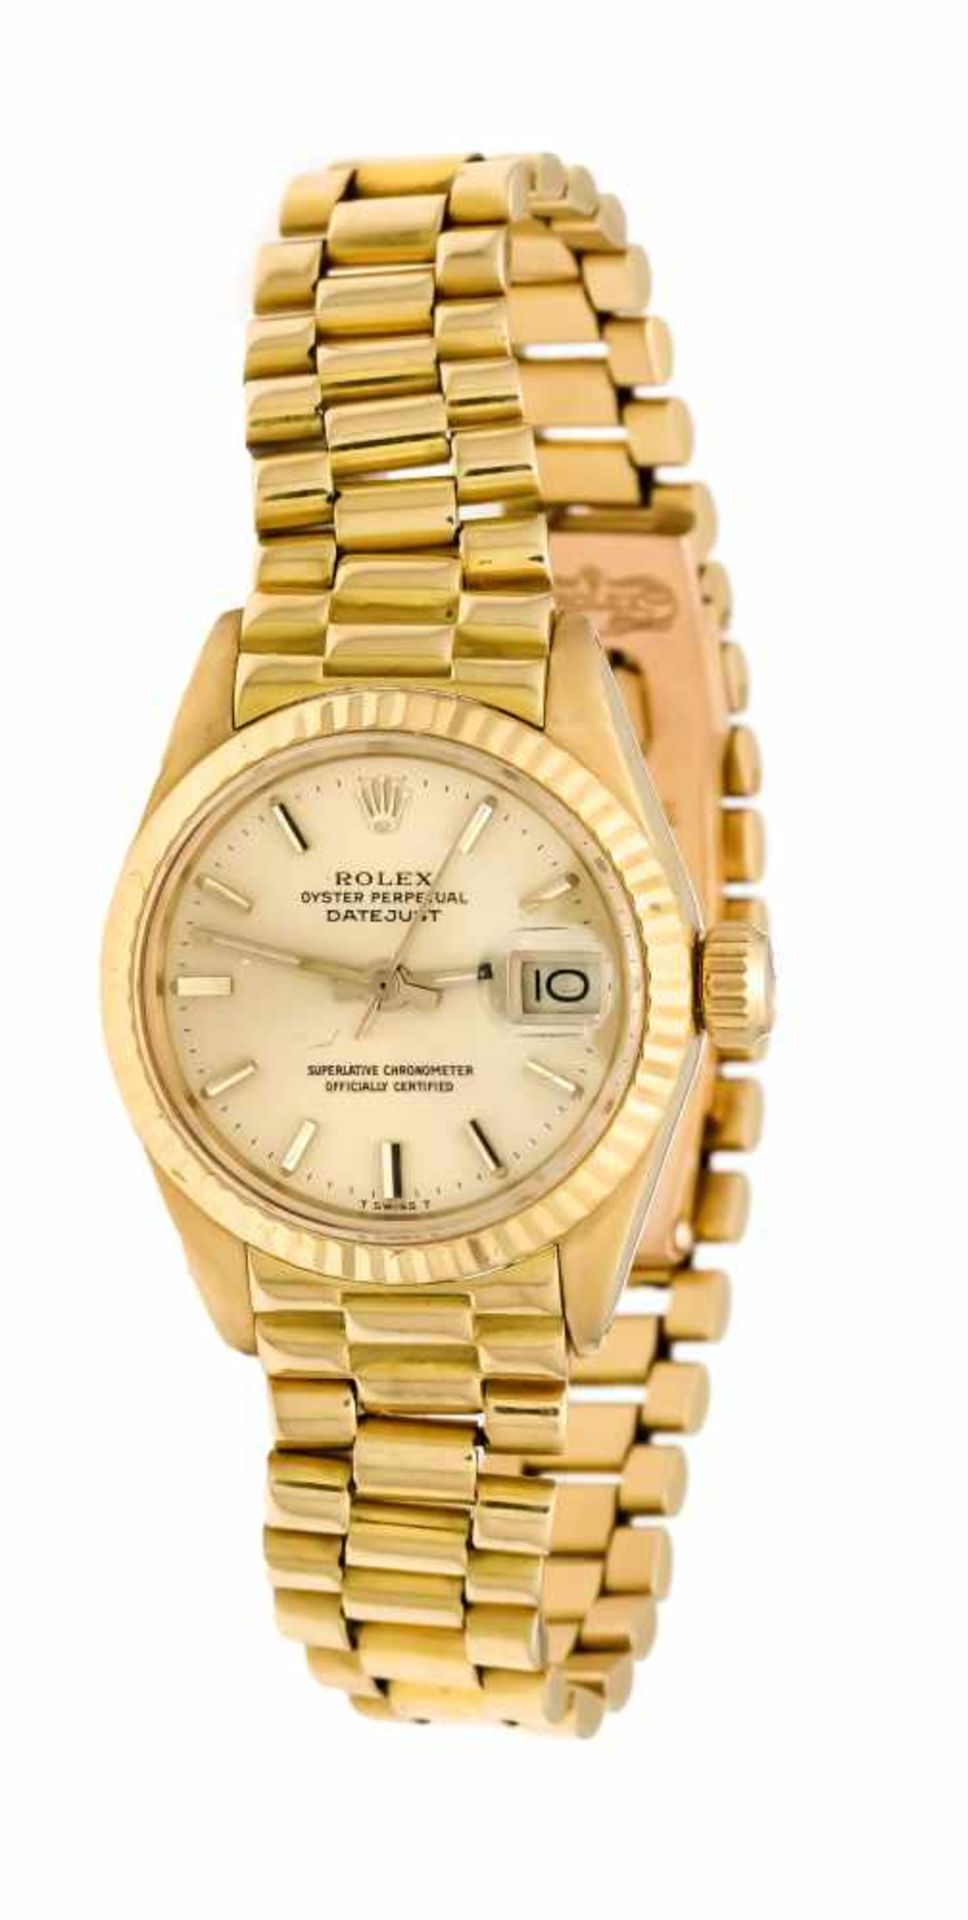 Rolex Datejust ladies watch Ref. 6917, yellow gold 750, with presidential strap and